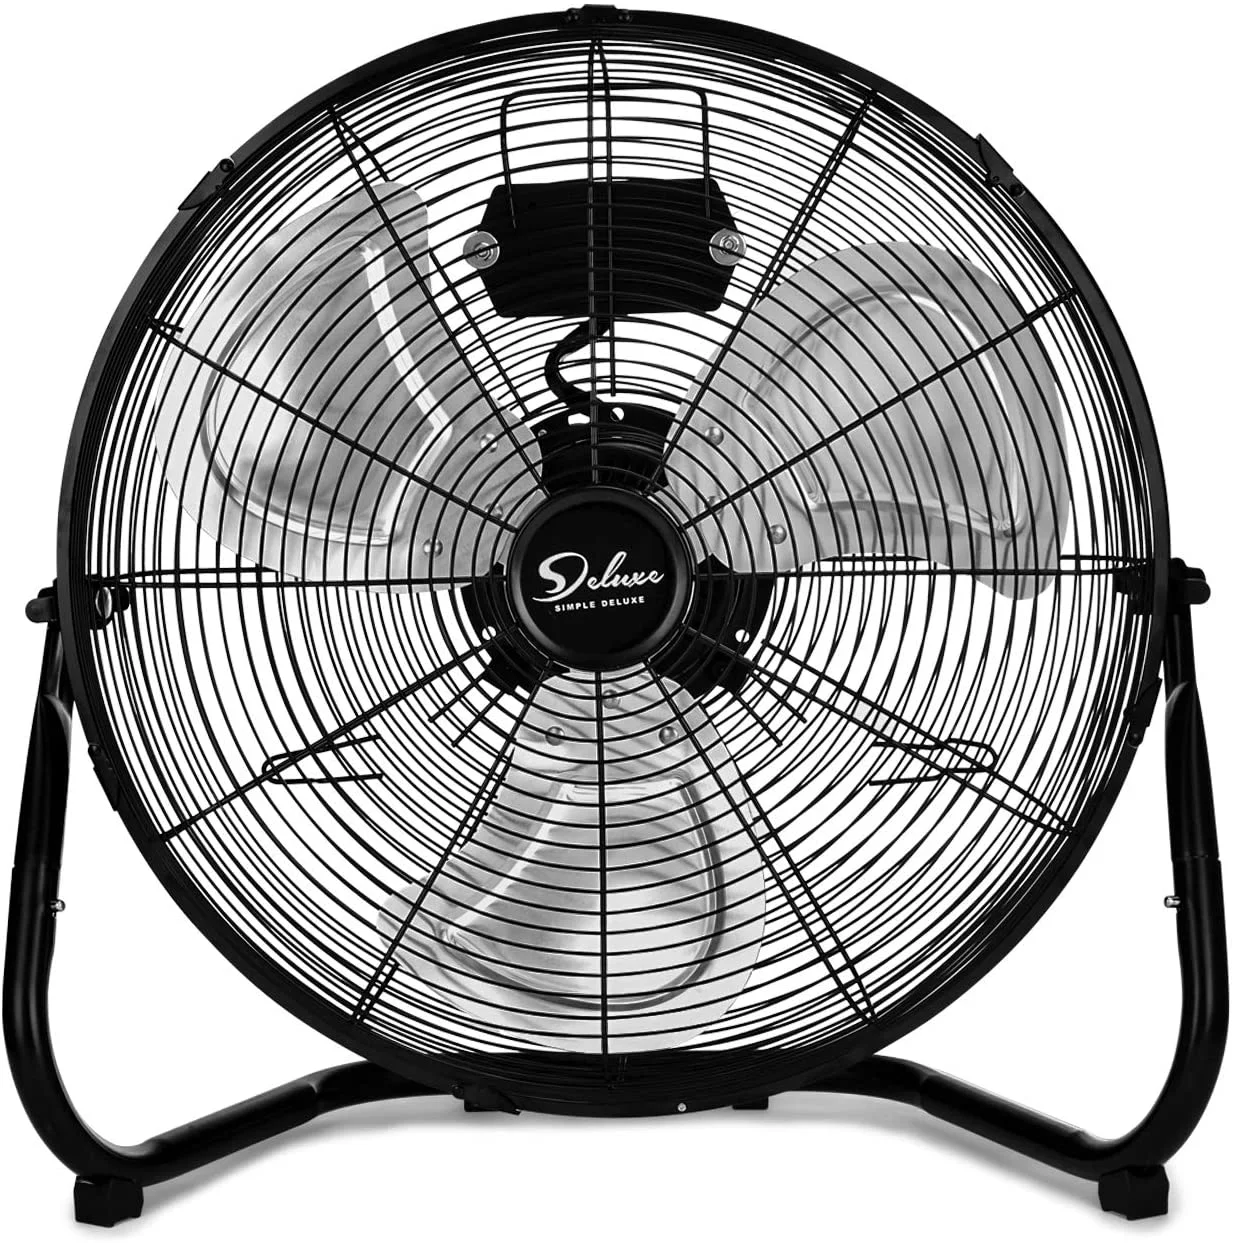 Simple Deluxe HIFANXFLOOR12 12 Inch 3-Speed High Velocity Heavy Duty Metal Industrial Floor Fans Oscillating Quiet for Home, Commercial, Residential, and Greenhouse Use, Outdoor/Indoor, Black, 1-Pack